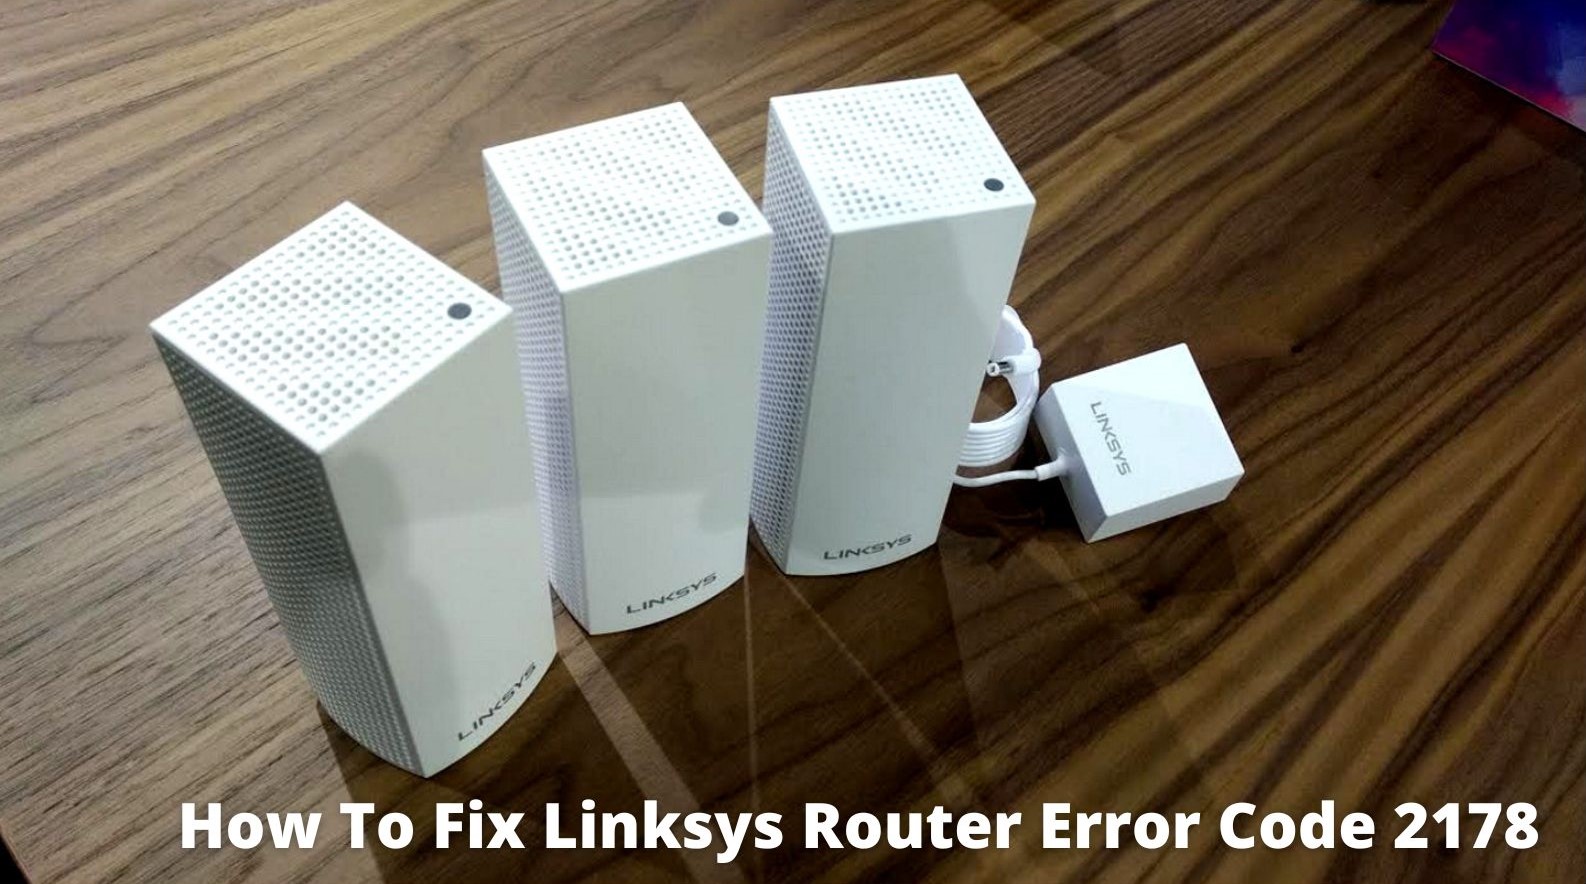 How To Fix Linksys Router Error Code 2178